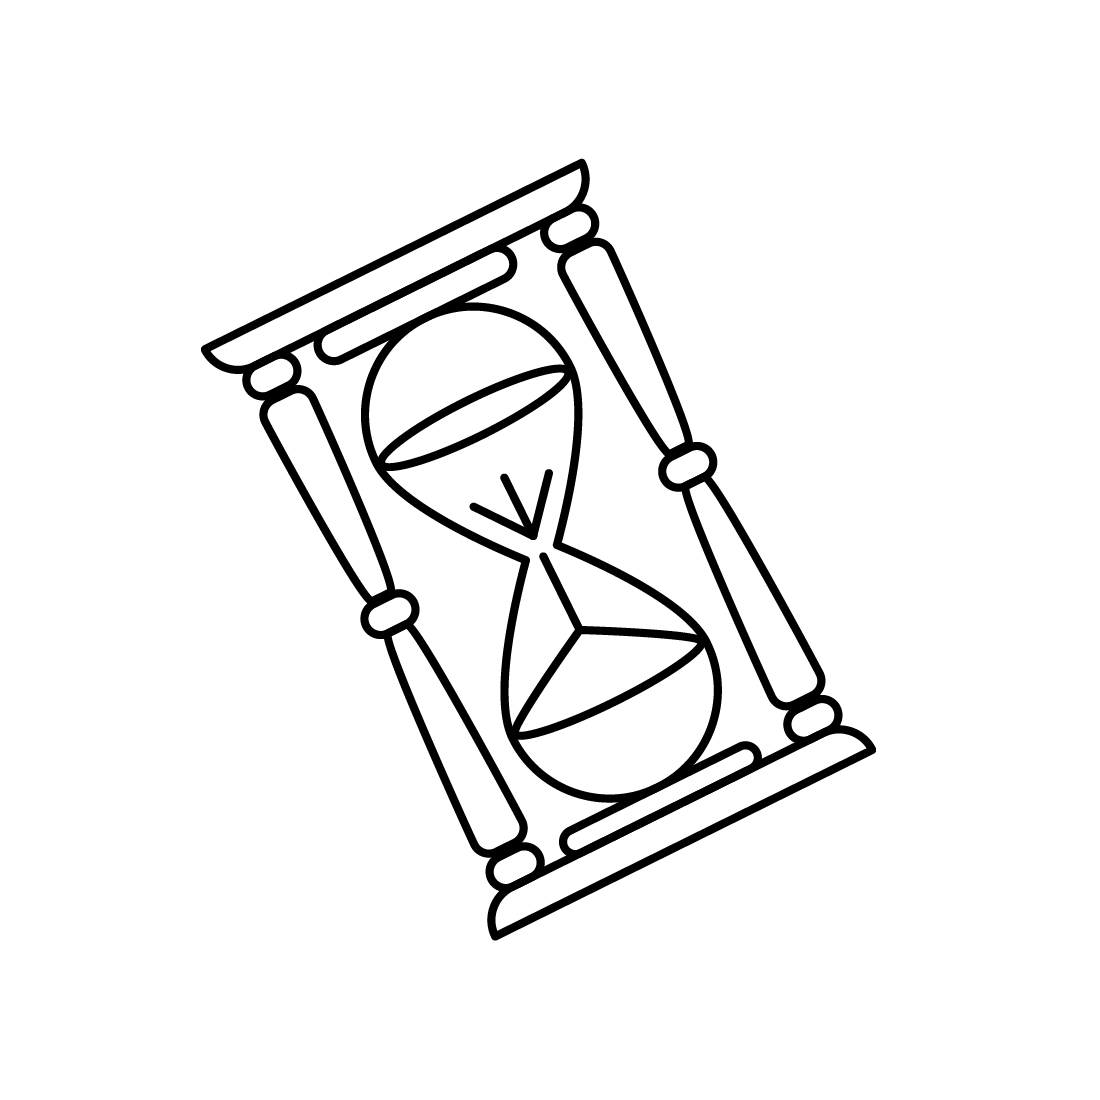 Black and white line drawing of an hourglass.